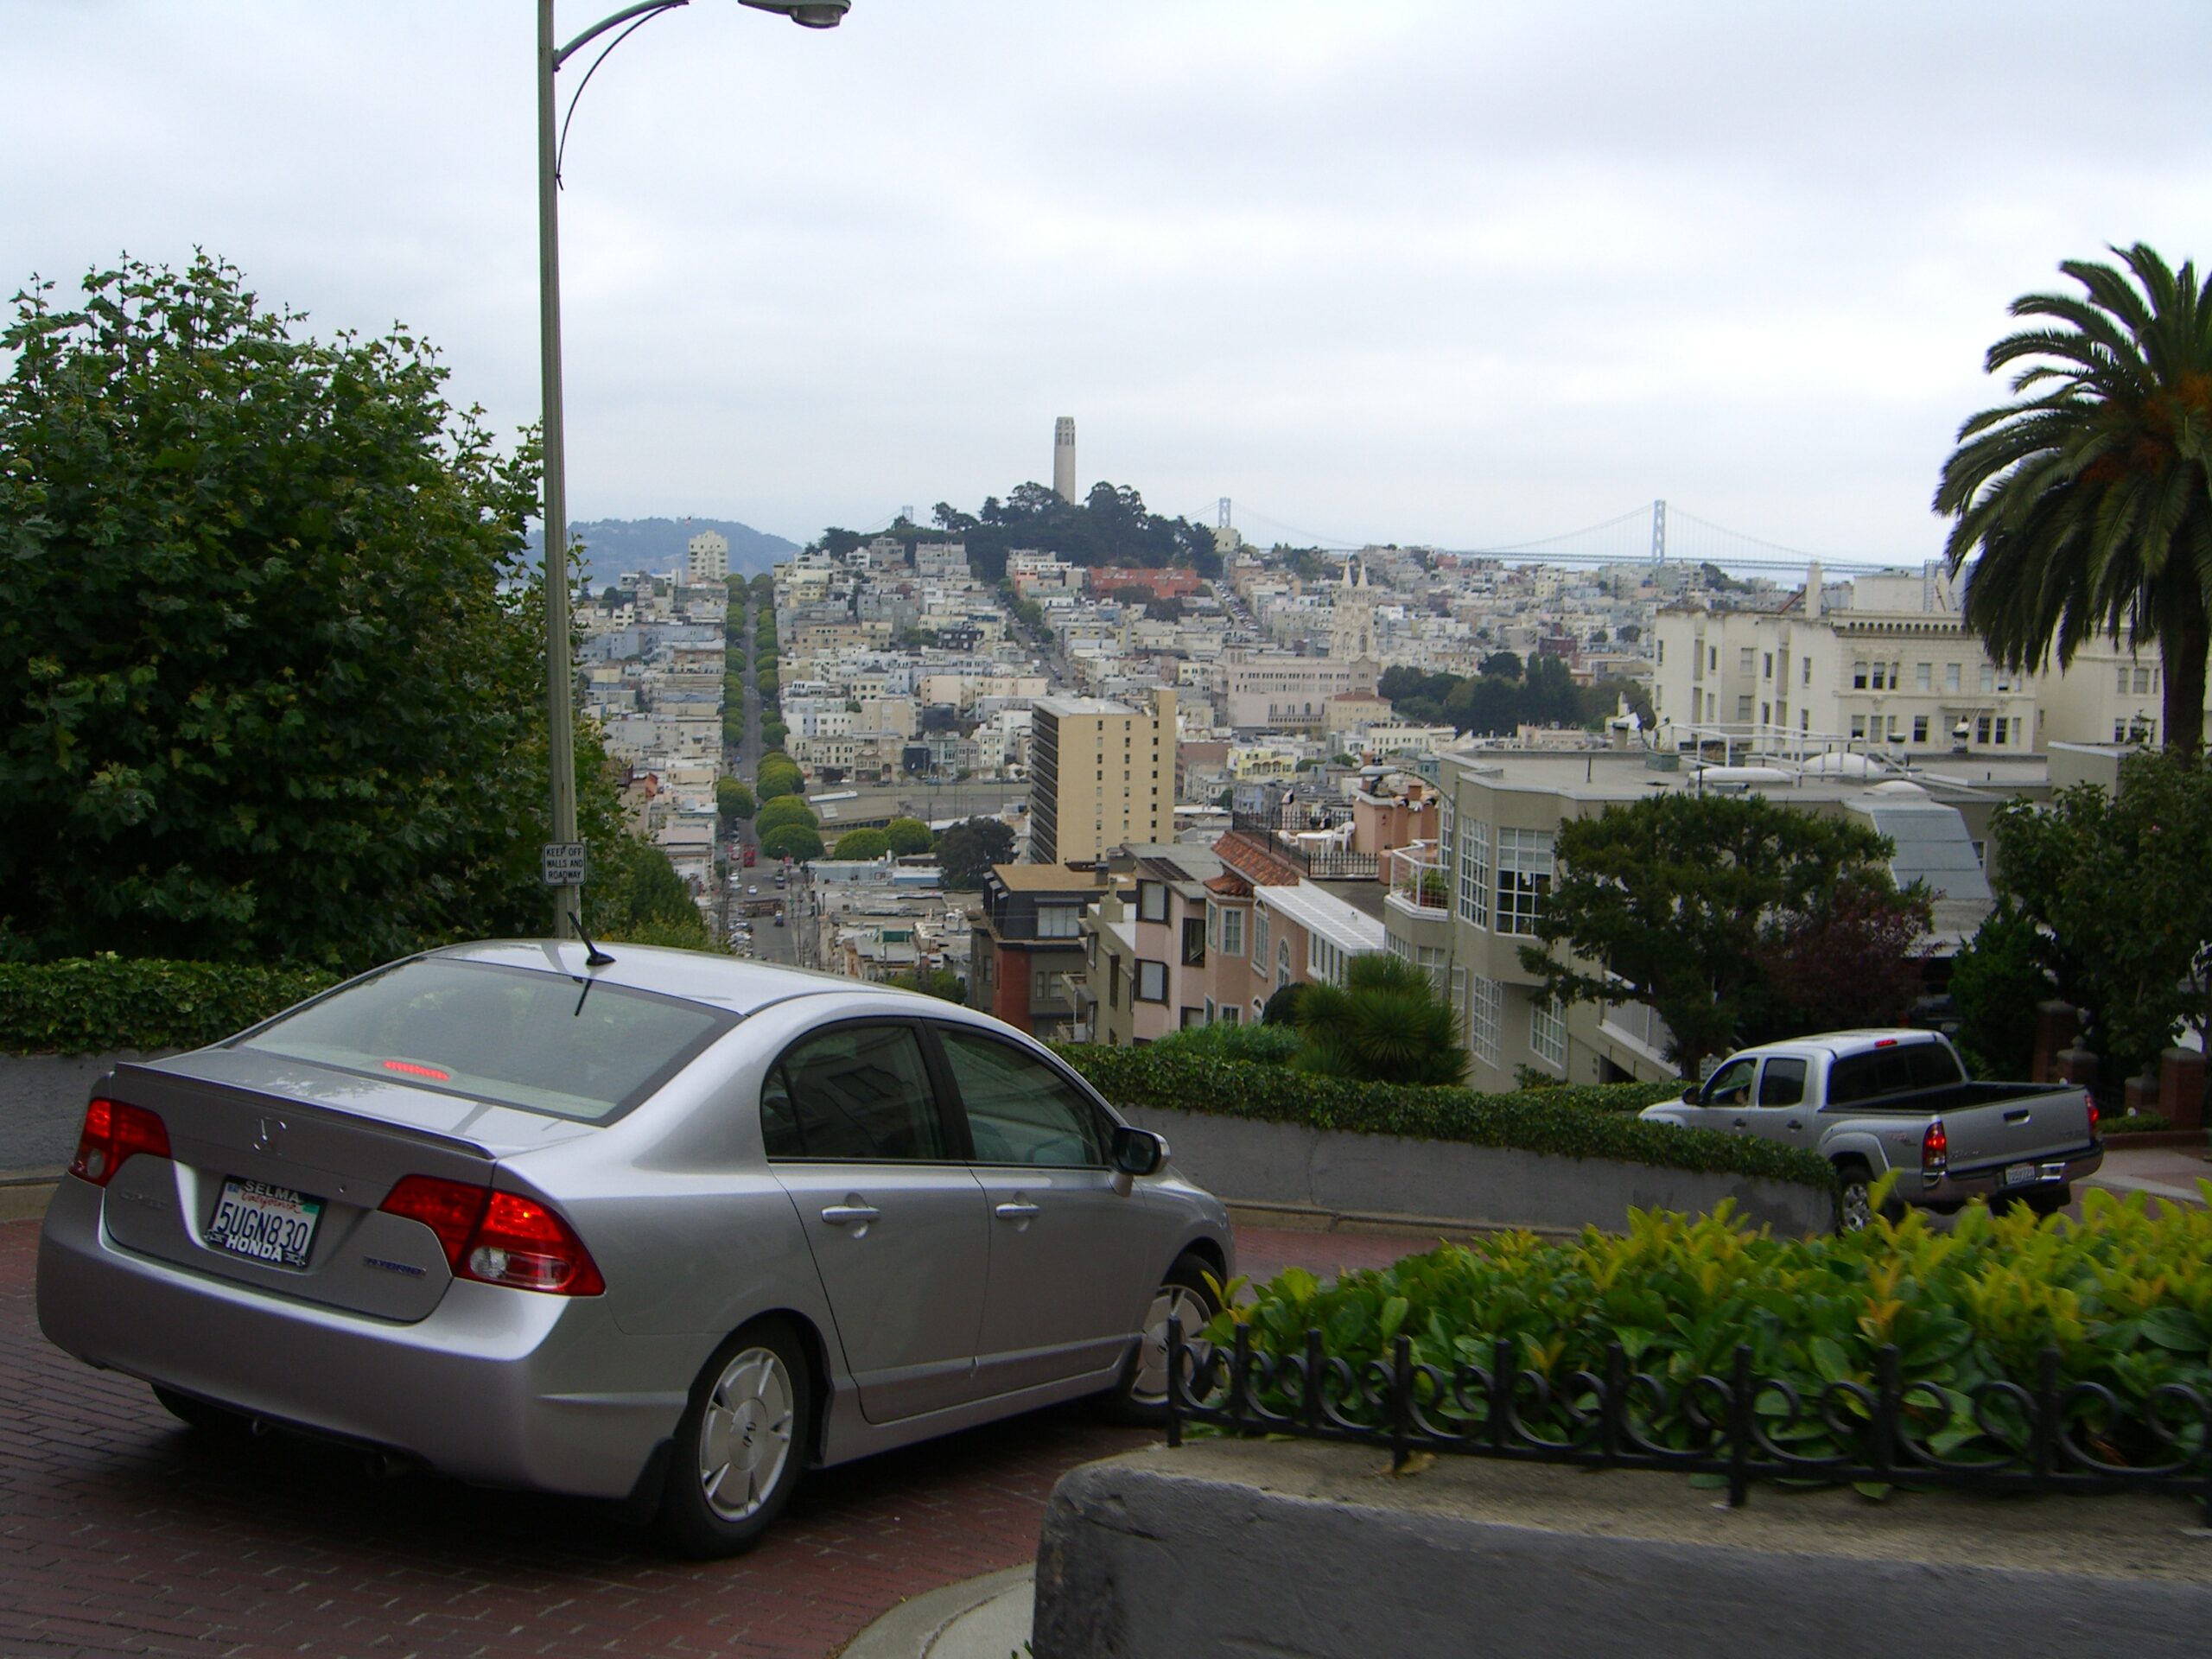 San Francisco's Lombard Street is the most crooked in the world.